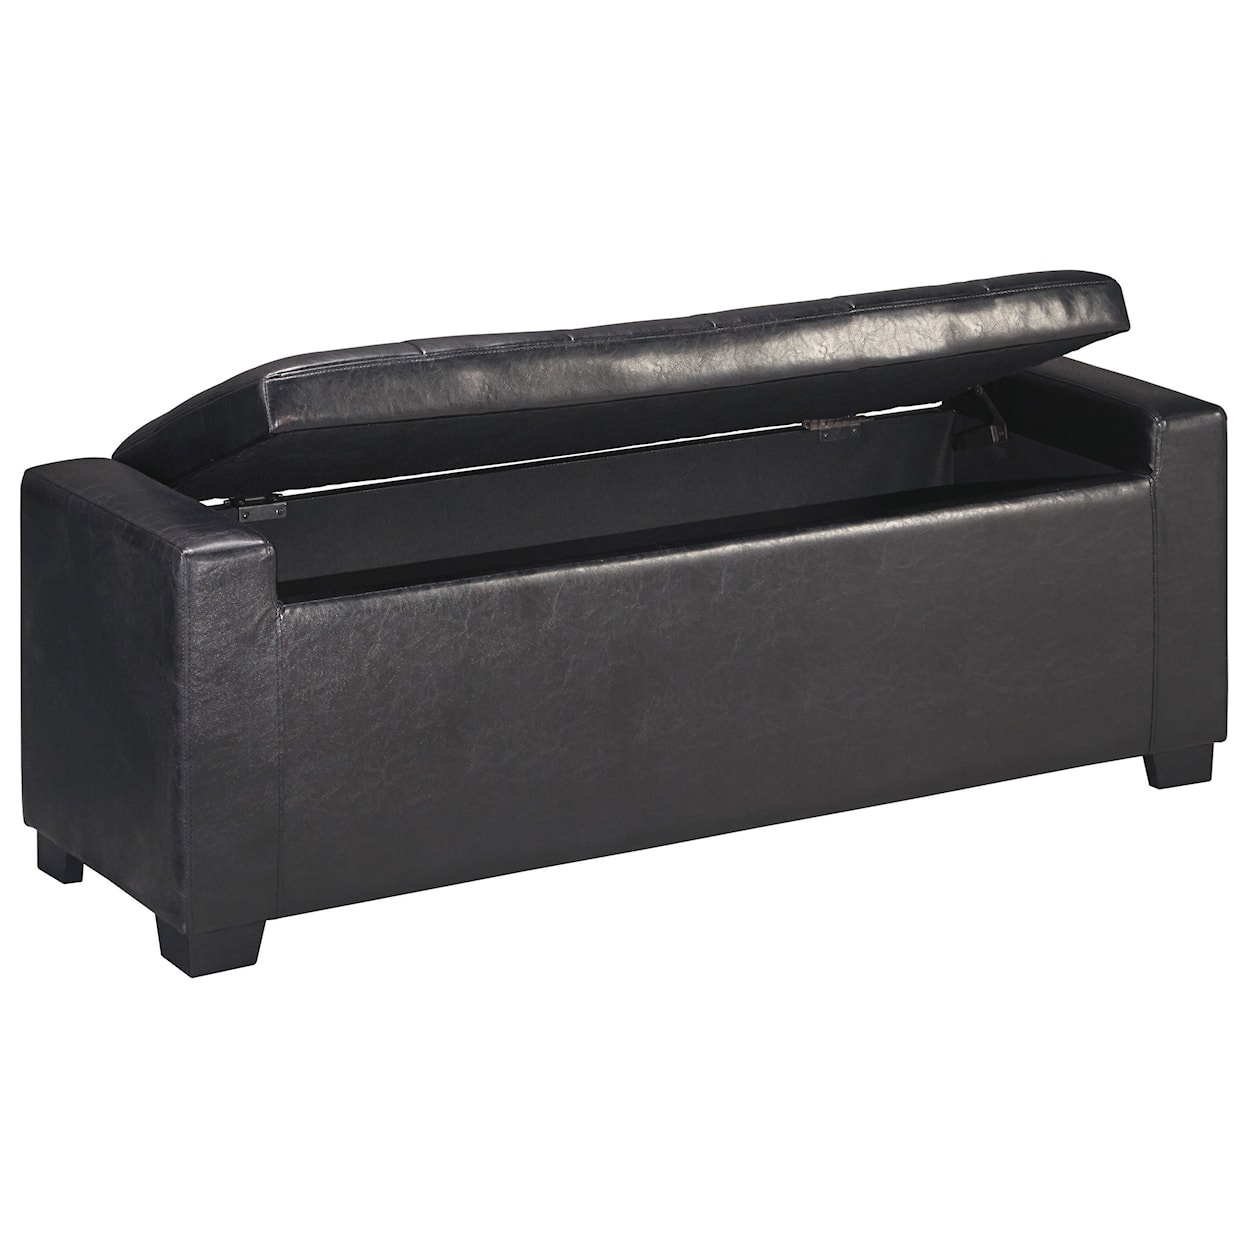 Benchcraft Benches Upholstered Storage Bench